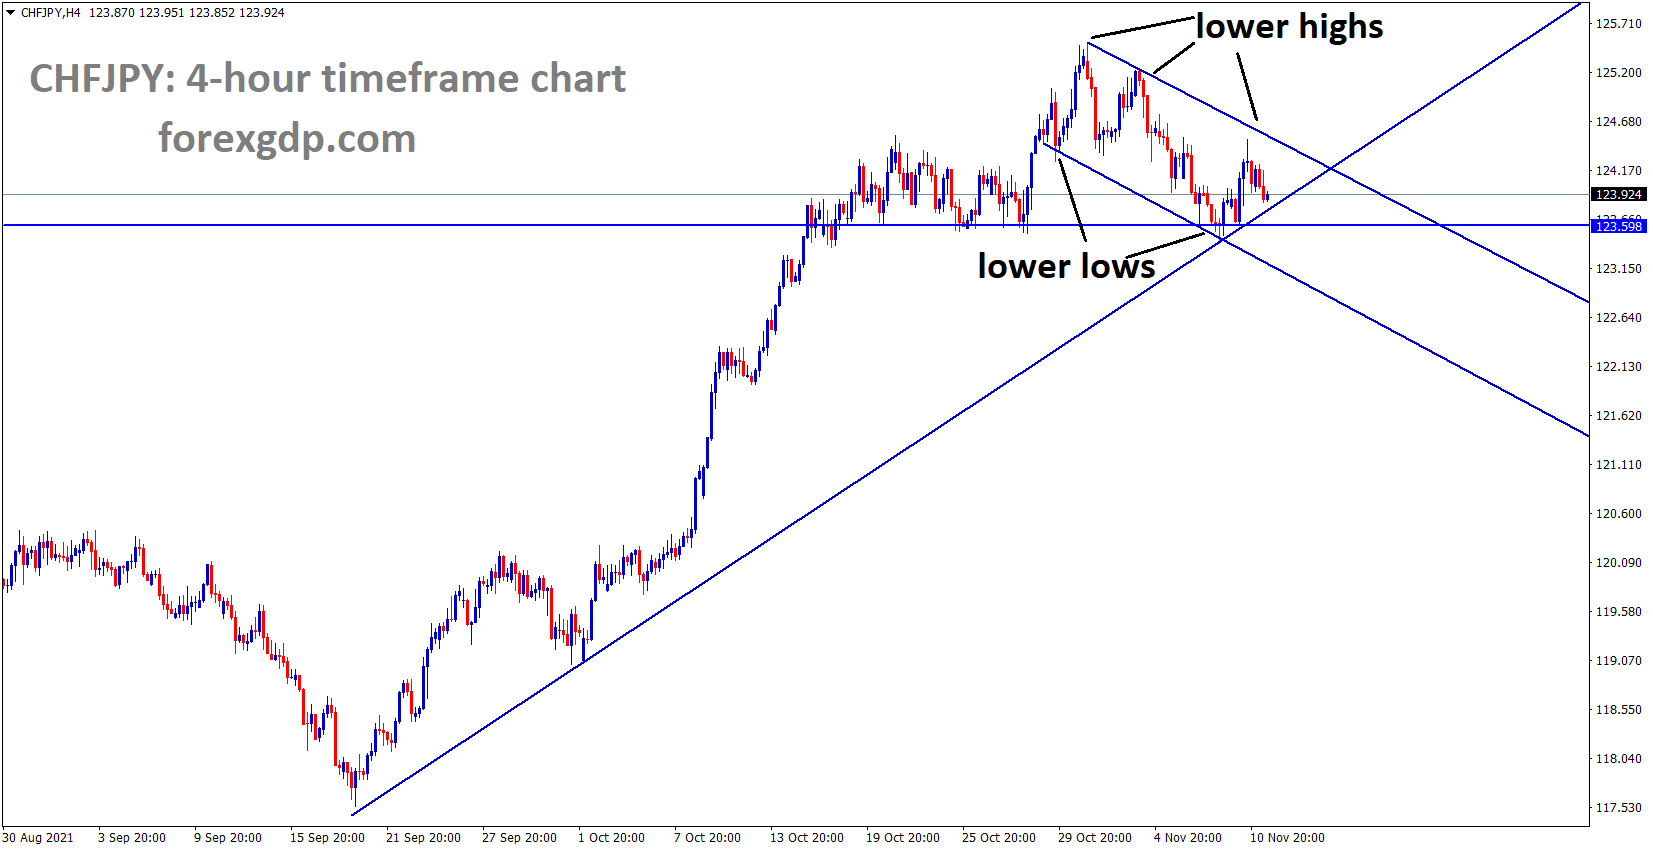 CHFJPY is moving in the Descending channel and the market fell from the lower high area